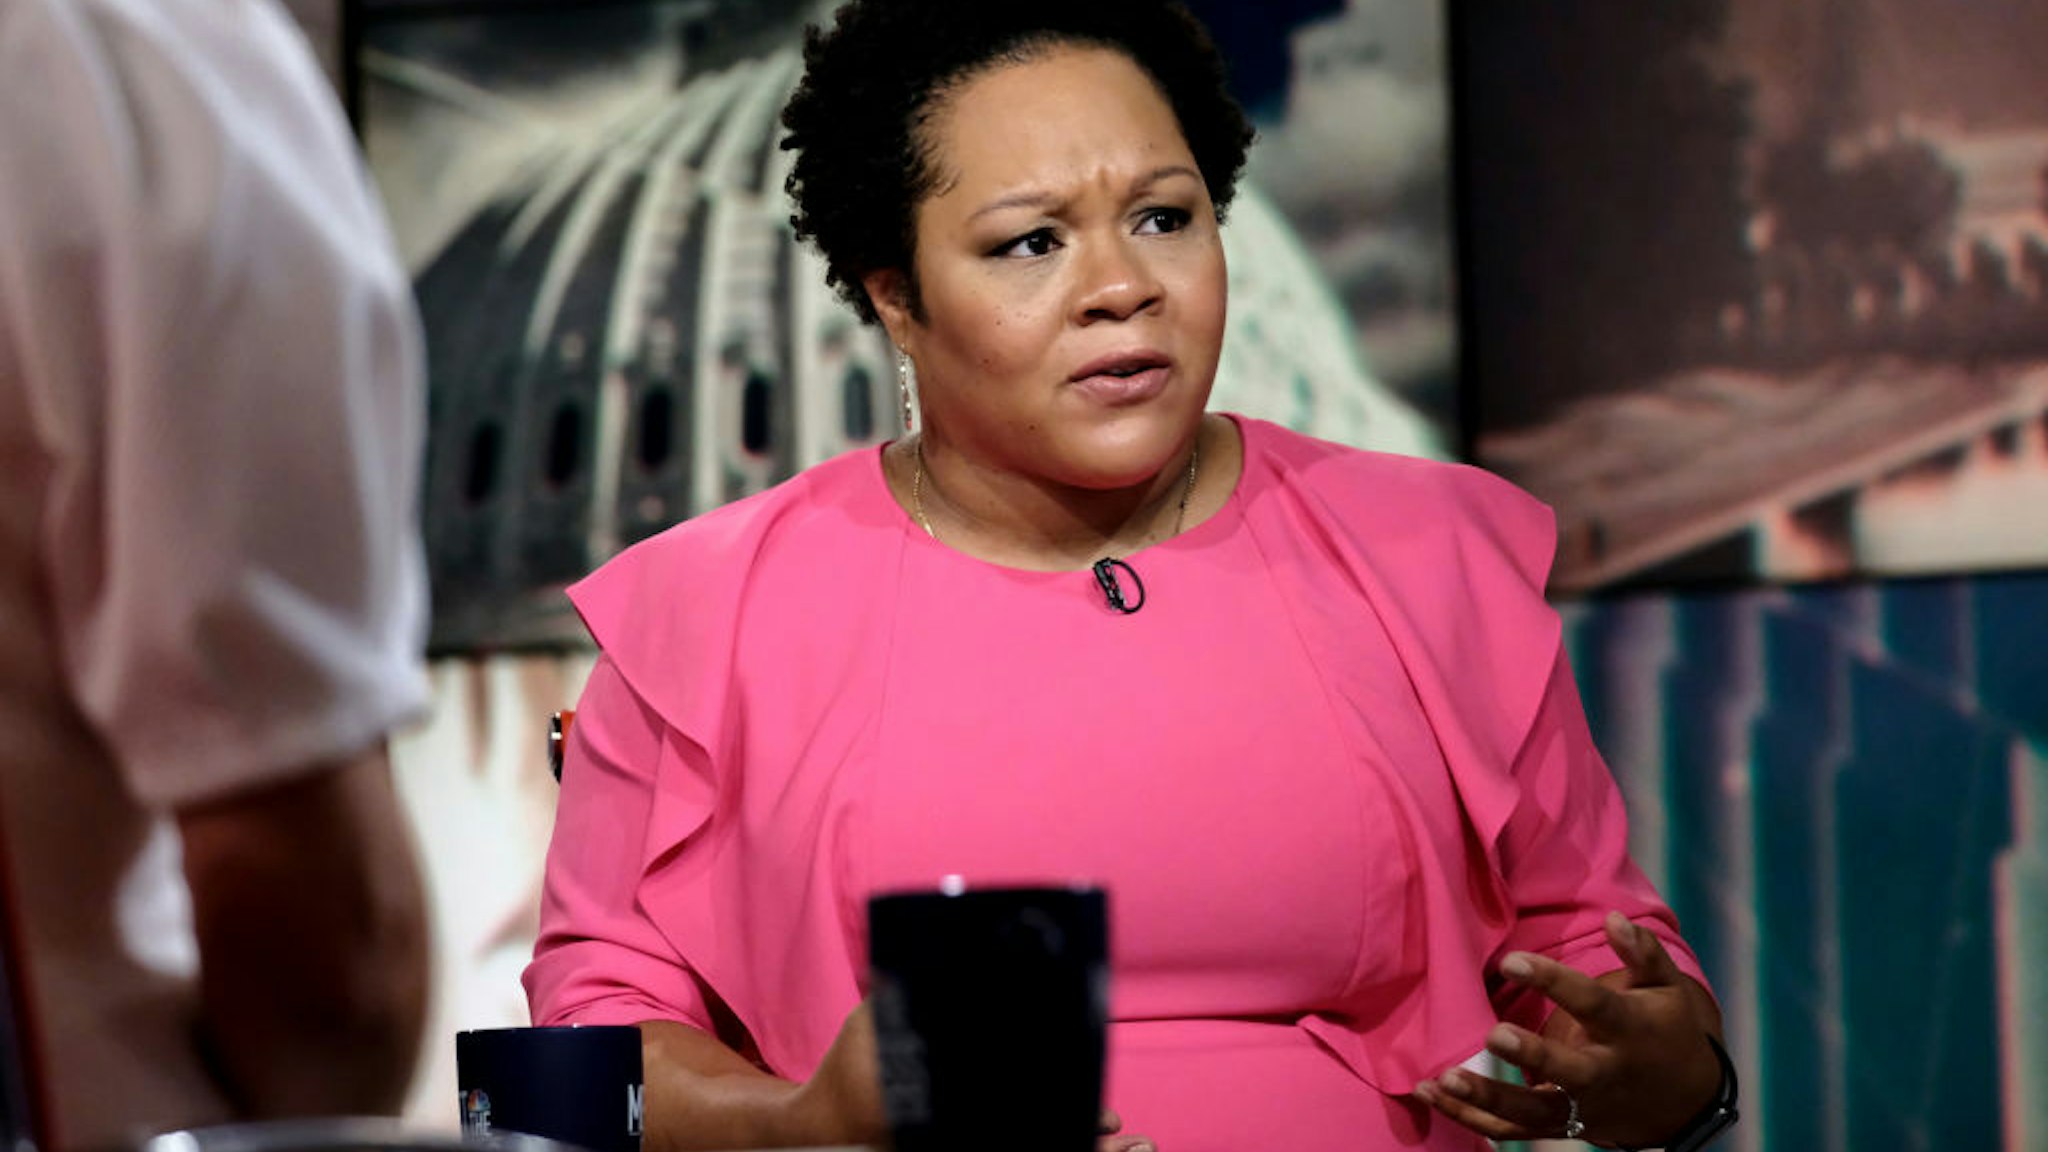 MEET THE PRESS -- Pictured: Yamiche Alcindor, White House Correspondent, PBS NewsHour; NBC News Contributor, appears on "Meet the Press" in Washington, D.C., Sunday, August 19, 2018. (Photo by: Paul Morigi/NBC/NBC Newswire/NBCUniversal via Getty Images)